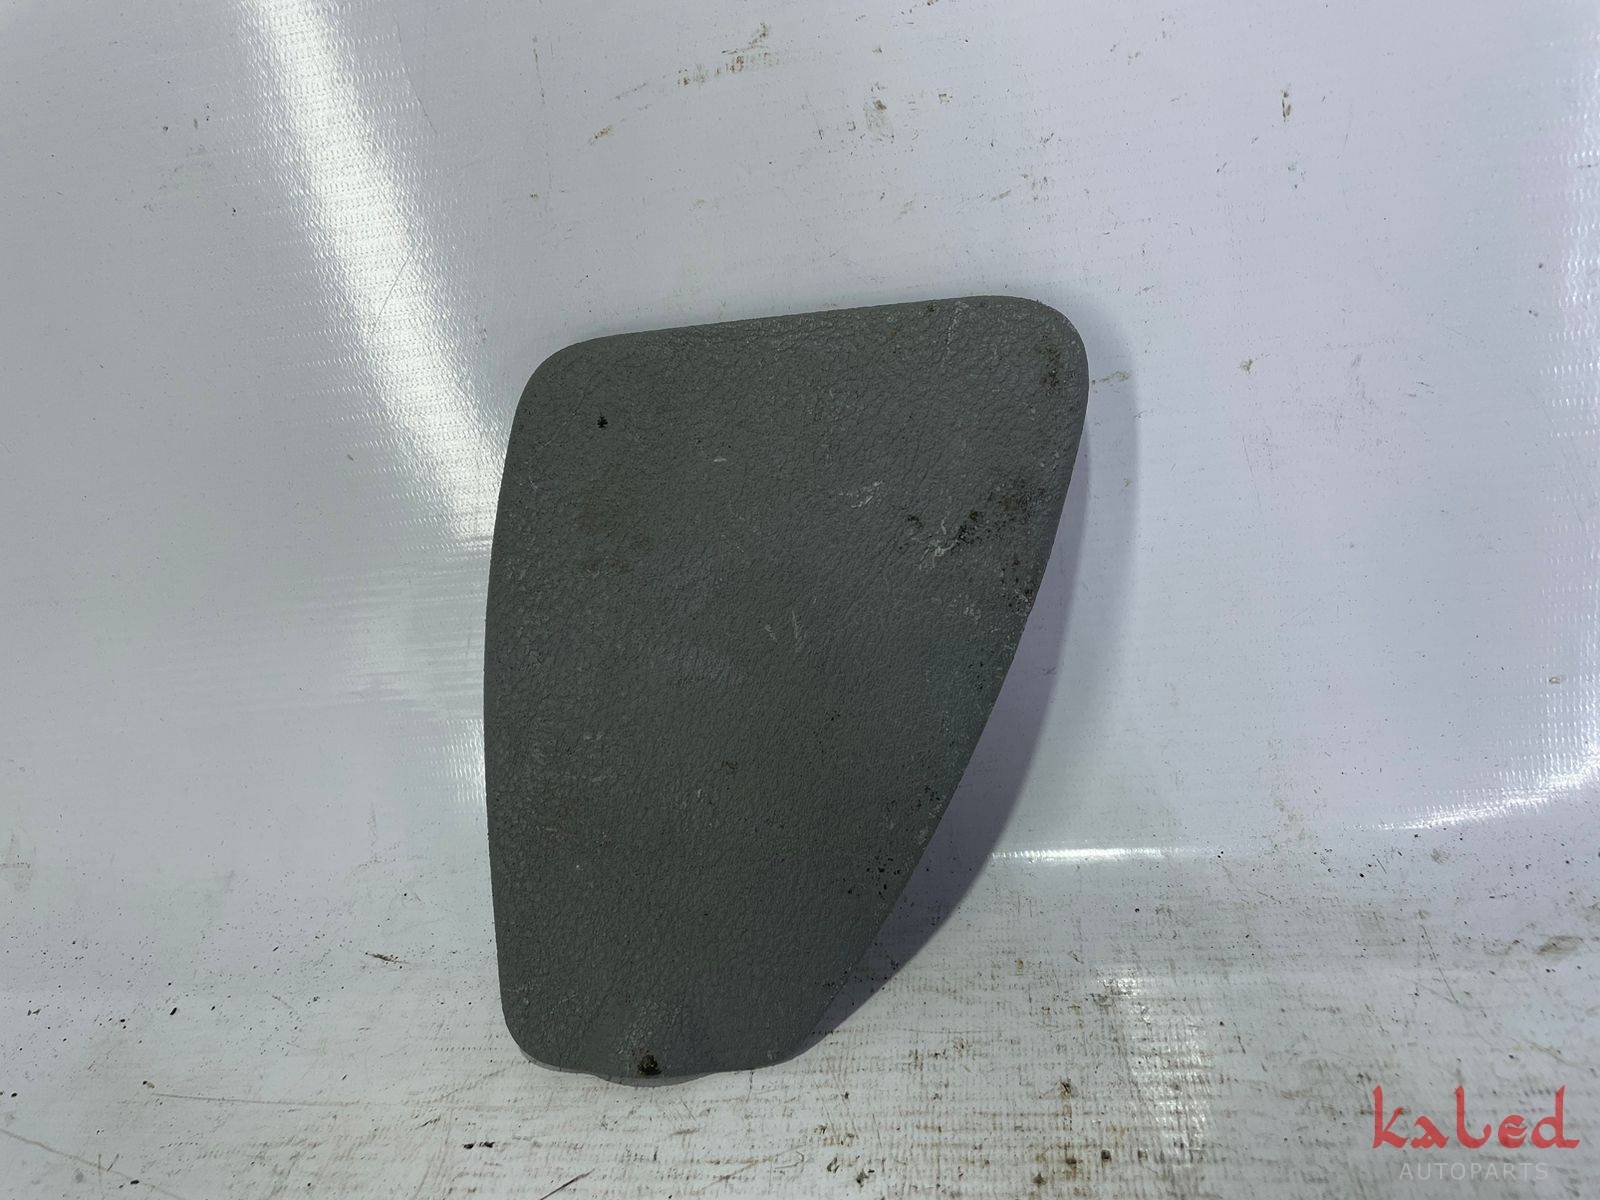 Tampa Caixa Fusíveis Lateral Painel Renault Clio 01-10 